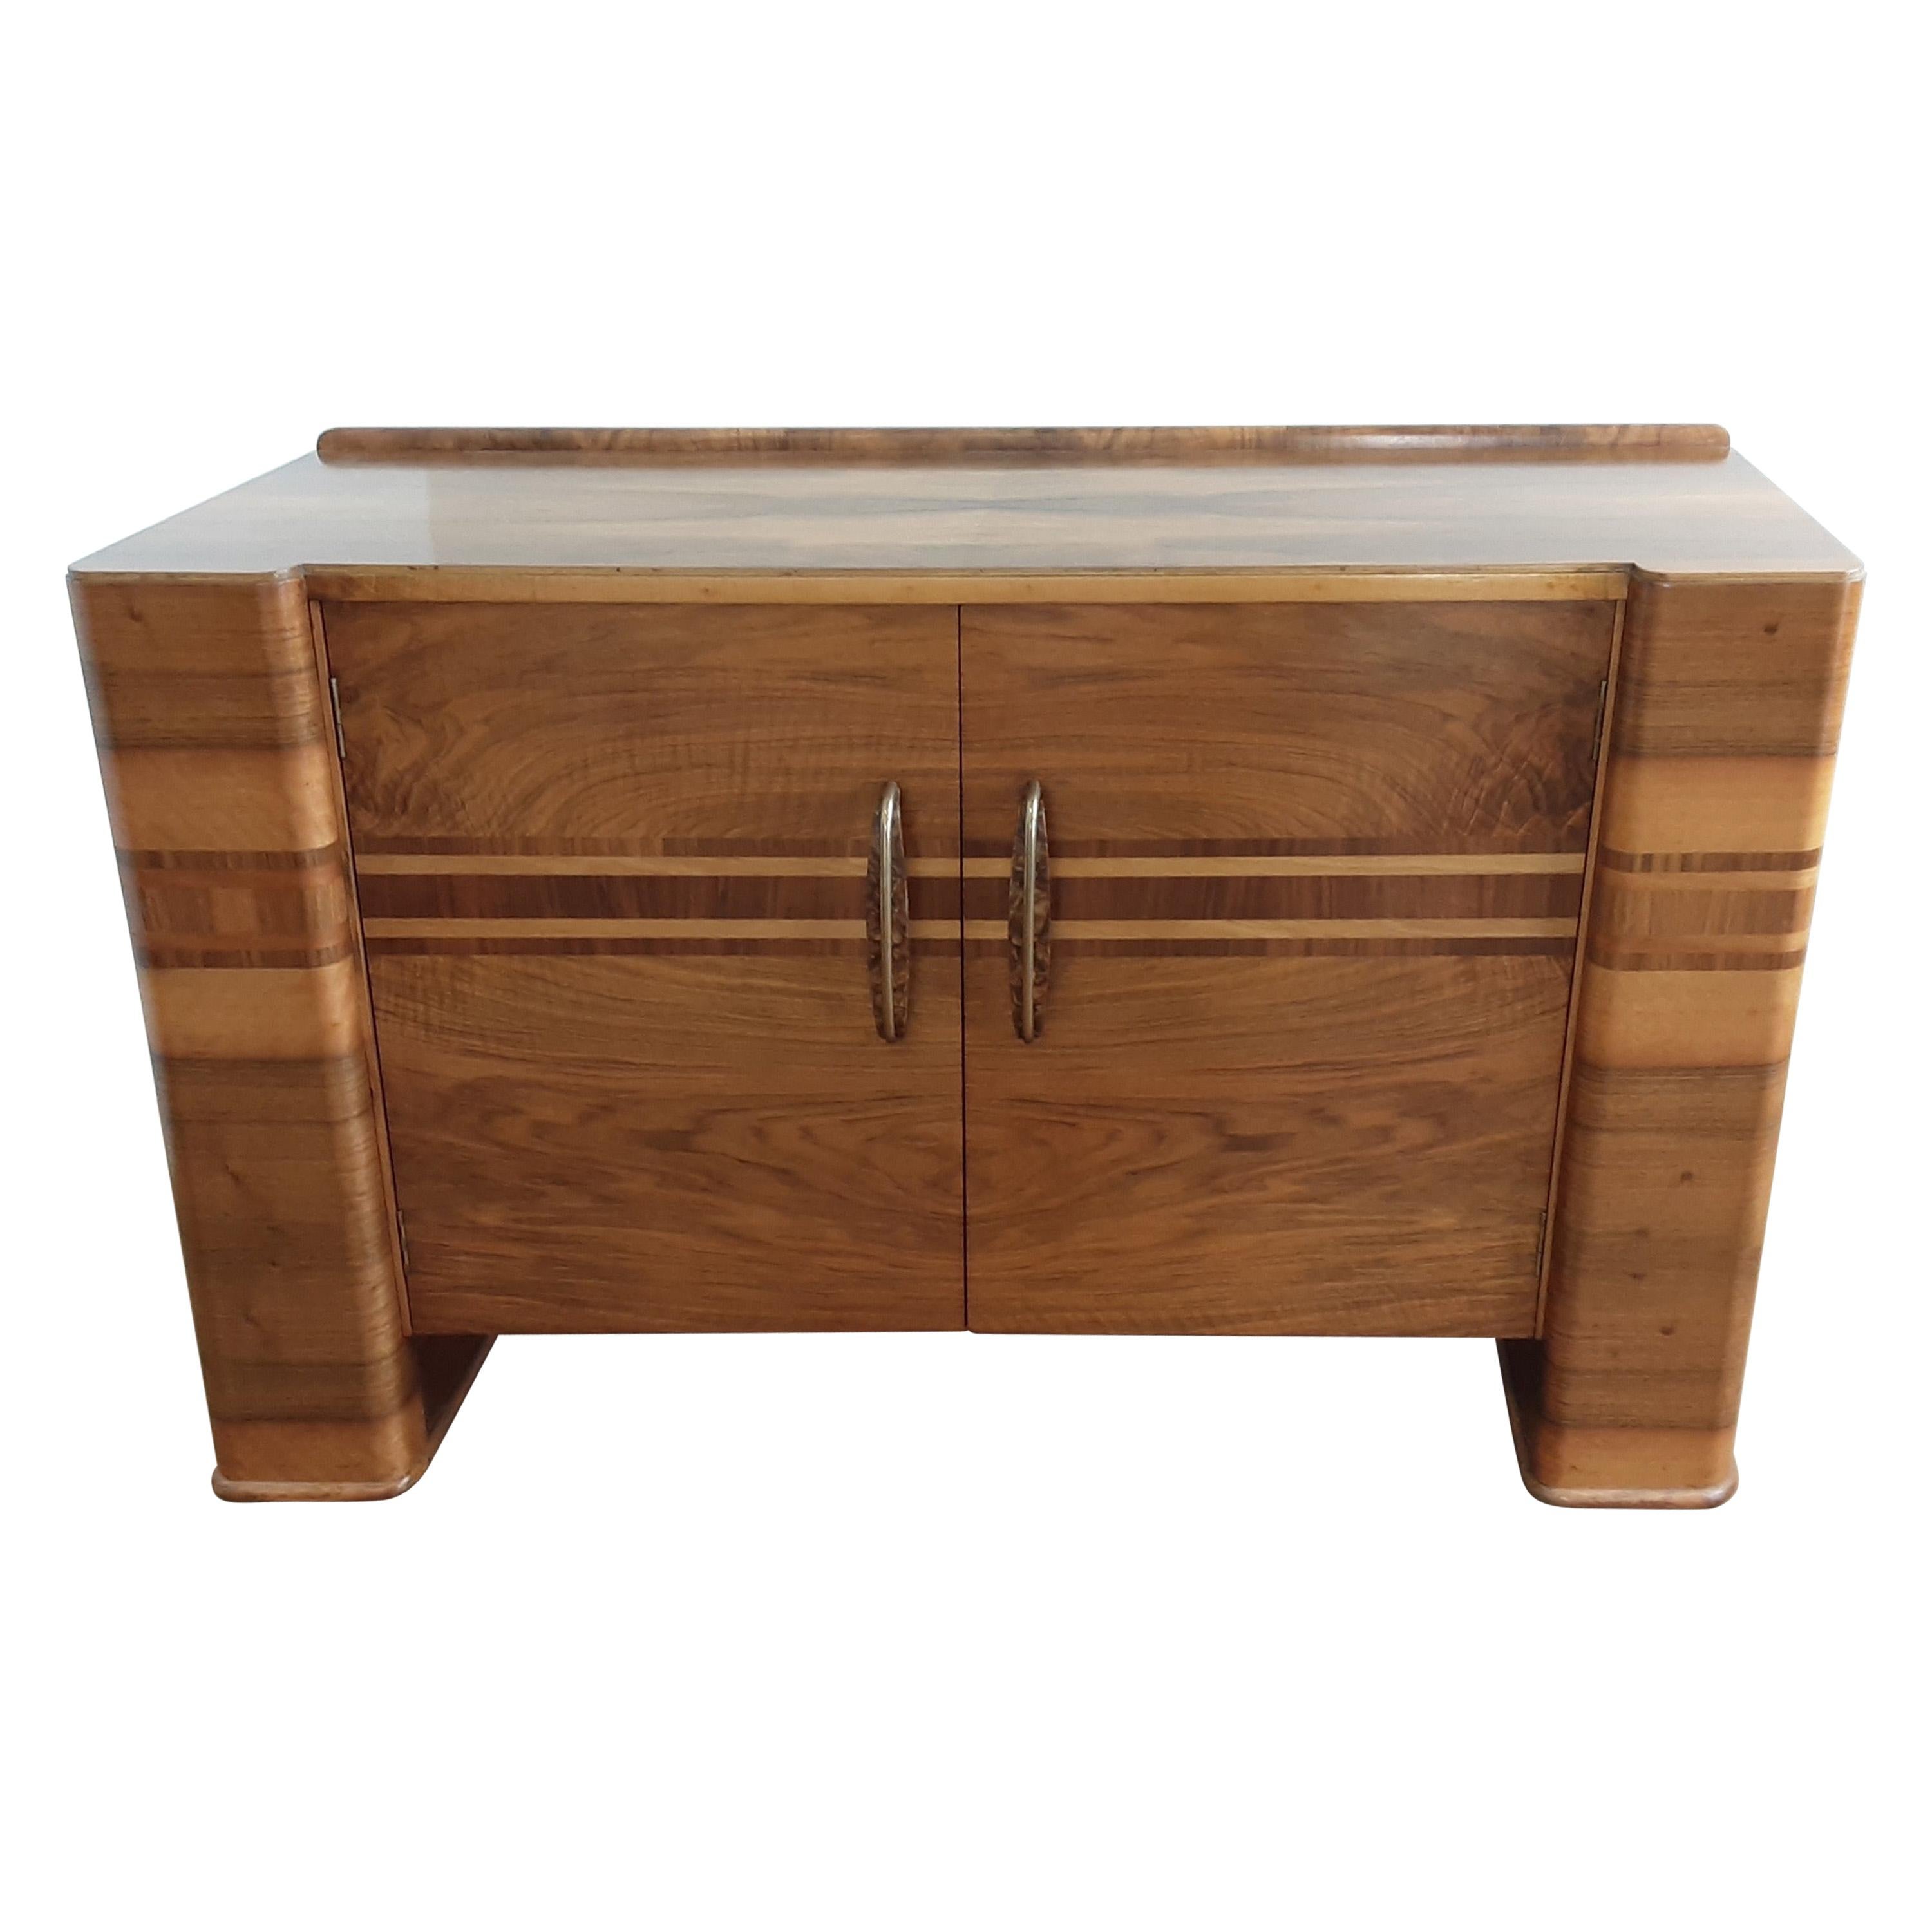 Scottish Art Deco Sideboard in a Golden Brown Walnut with a Modernist Design For Sale